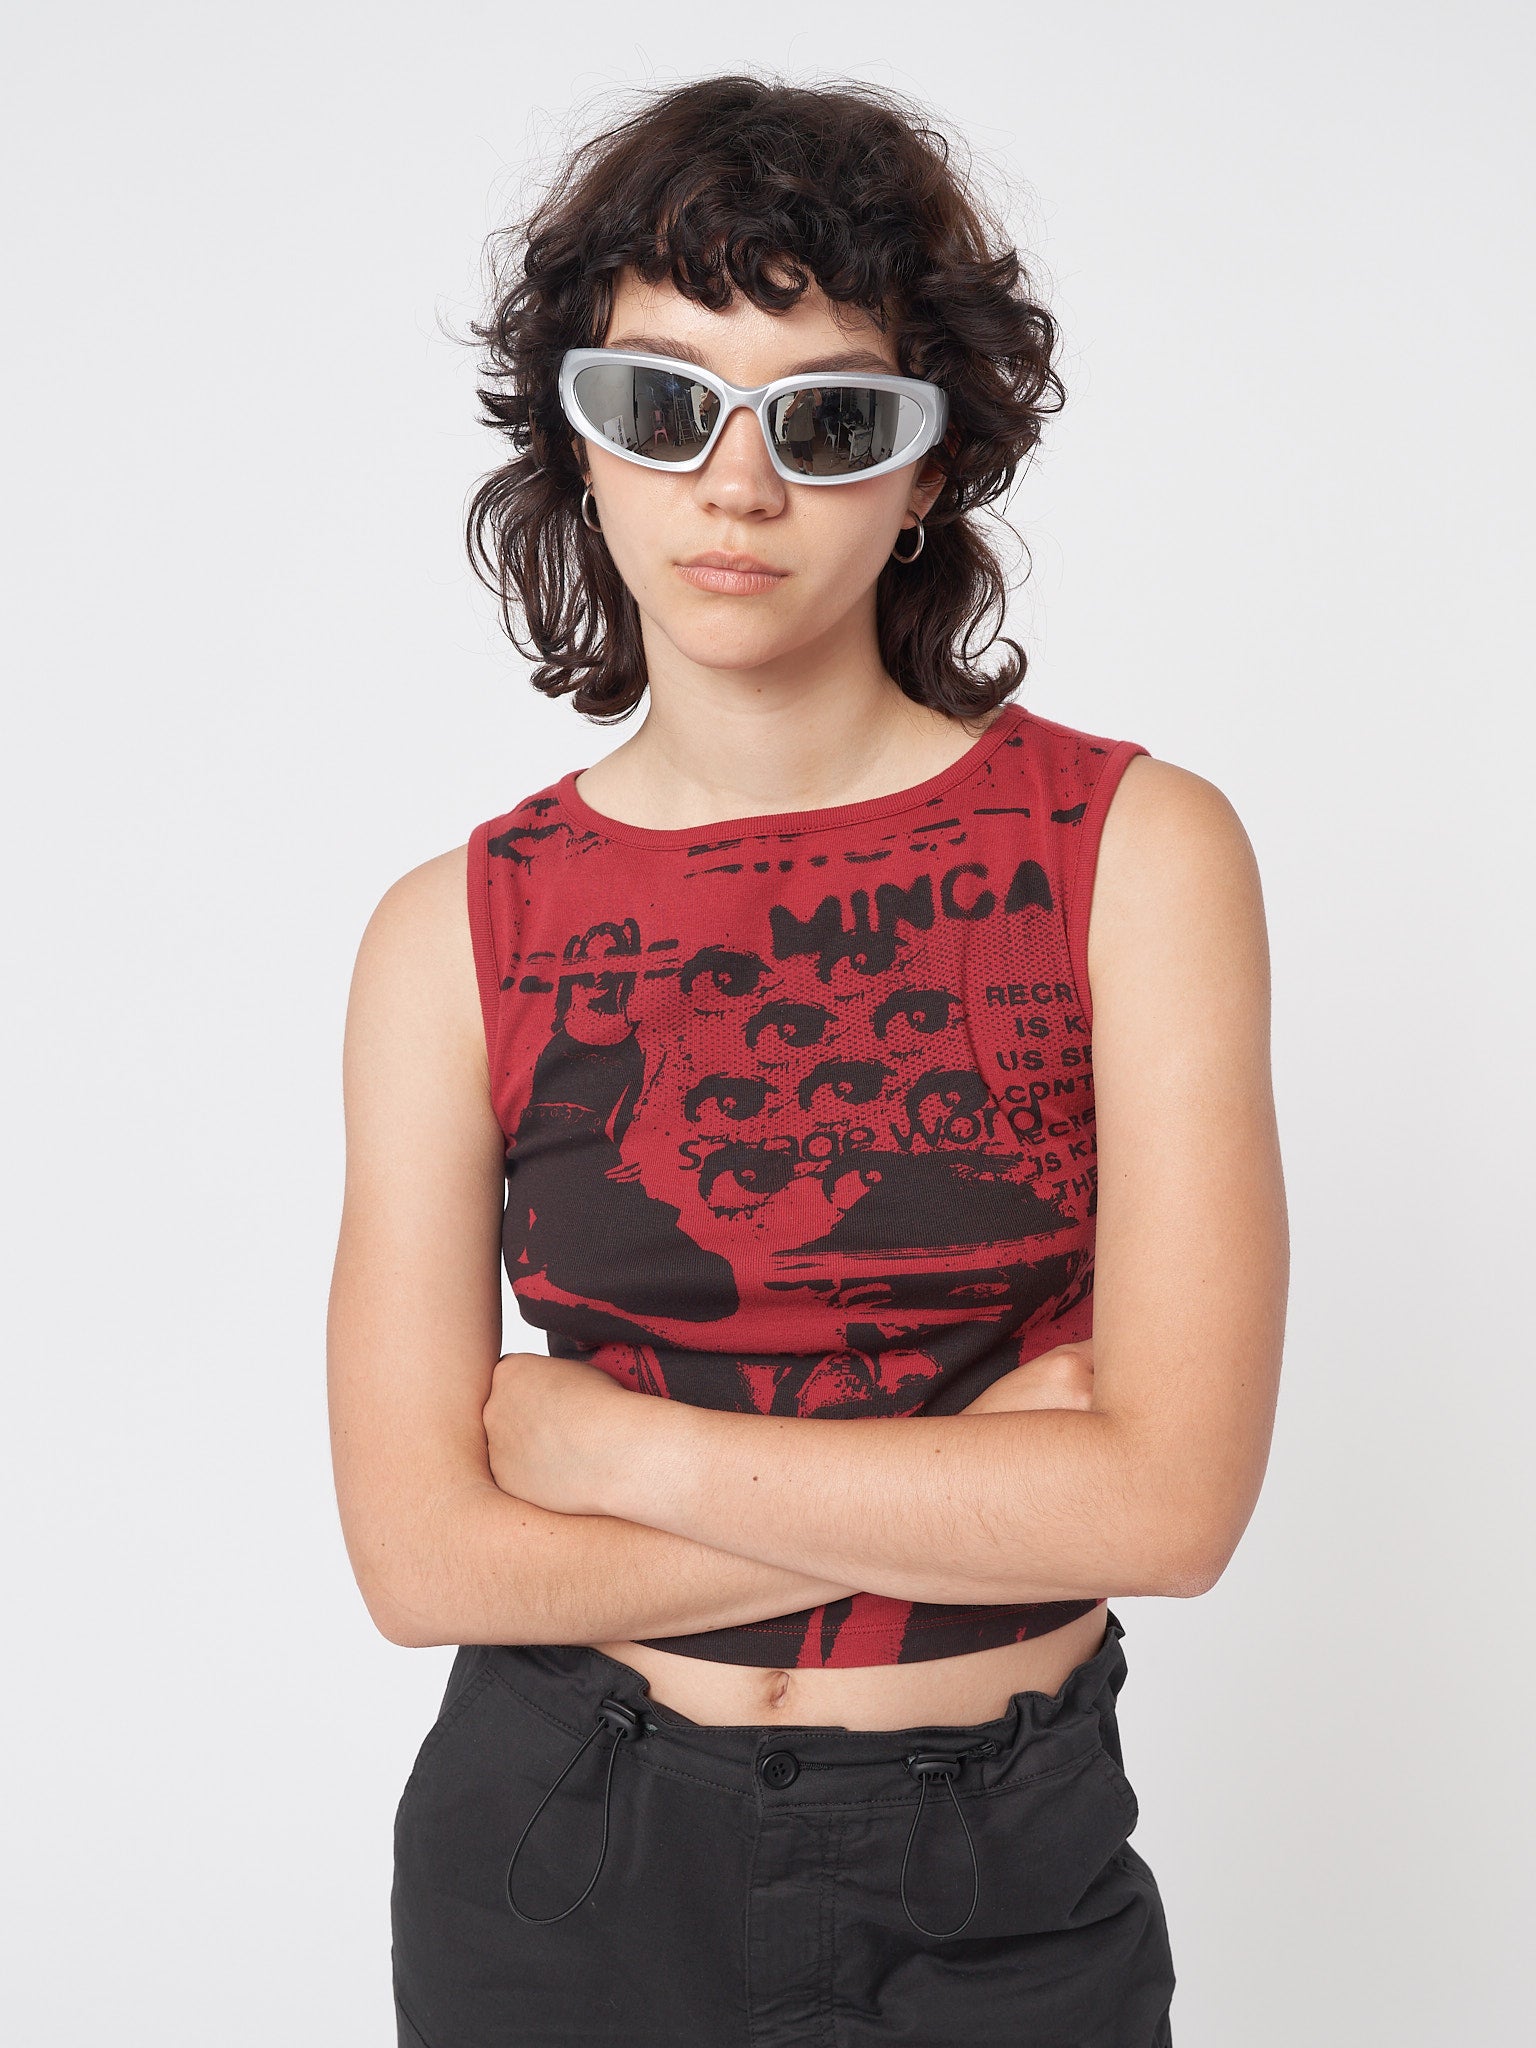 Vest top in red with y2k graphic front print in black